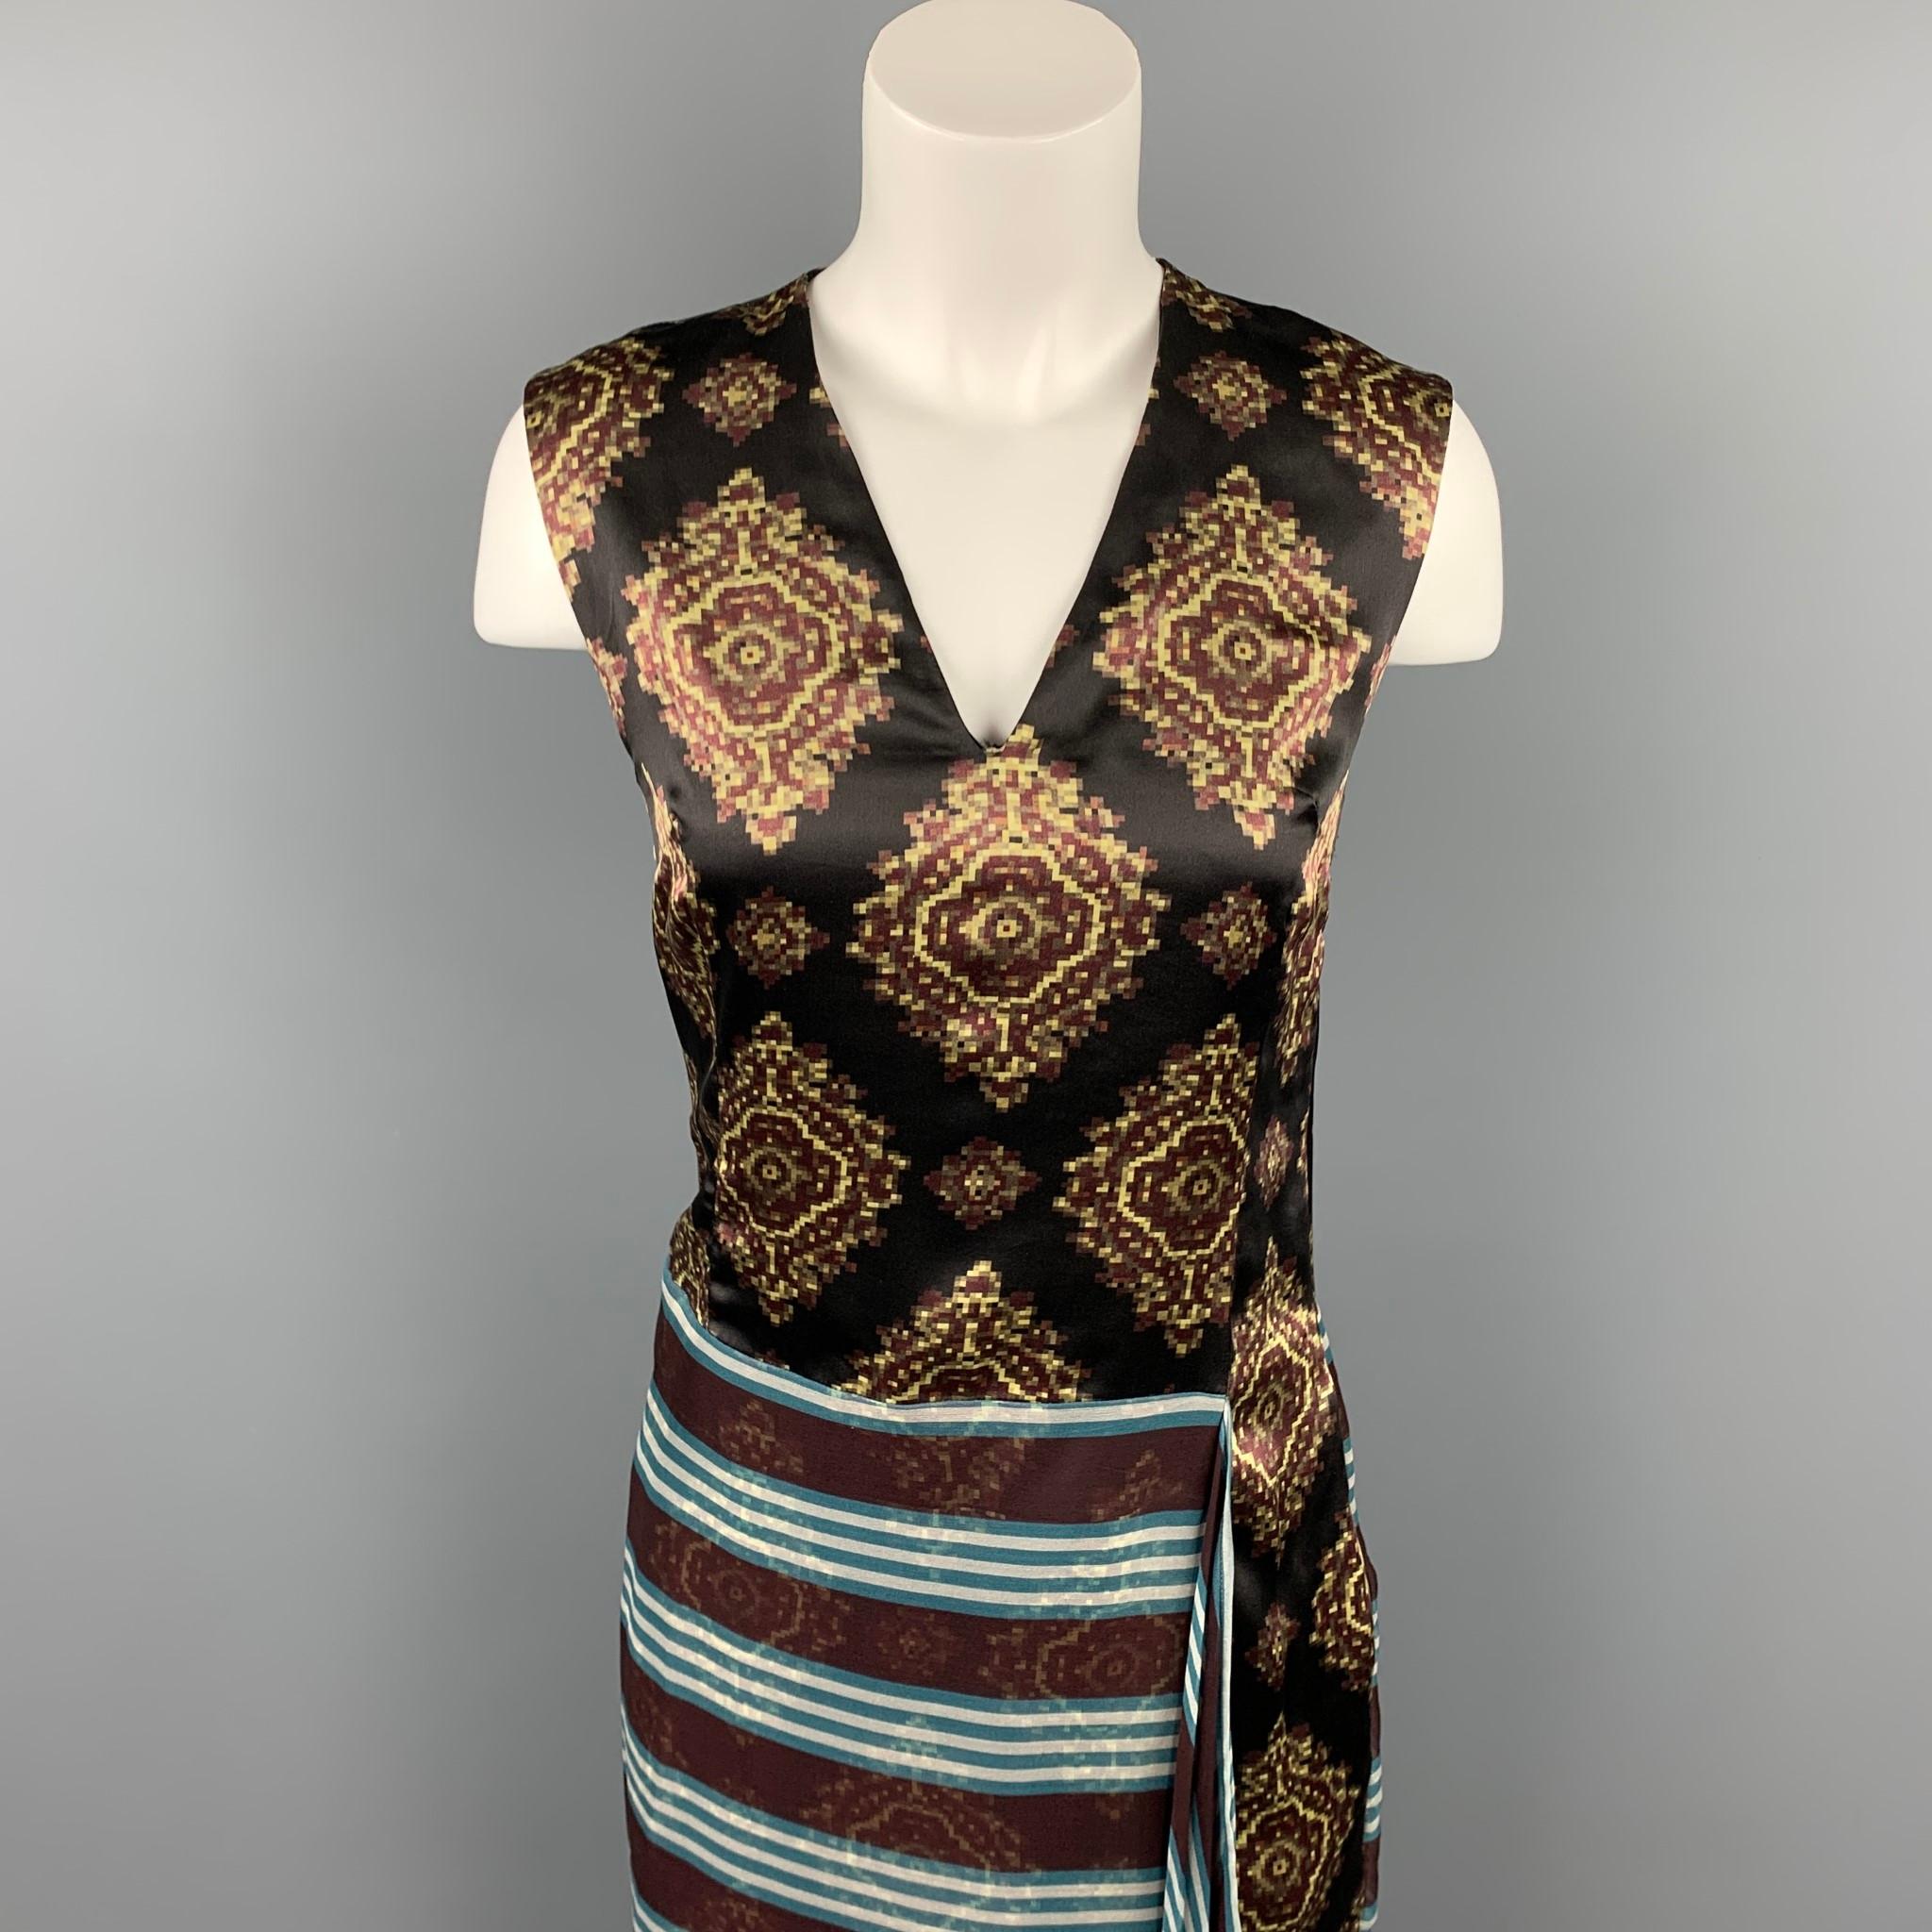 DRIES VAN NOTEN dress comes in a multi-color patchwork silk with a slip liner featuring a shift style, front see through layer, v-neck, and a side zipper closure. Made in Belgium.

Very Good Pre-Owned Condition.
Marked: 34

Measurements:

Bust: 32